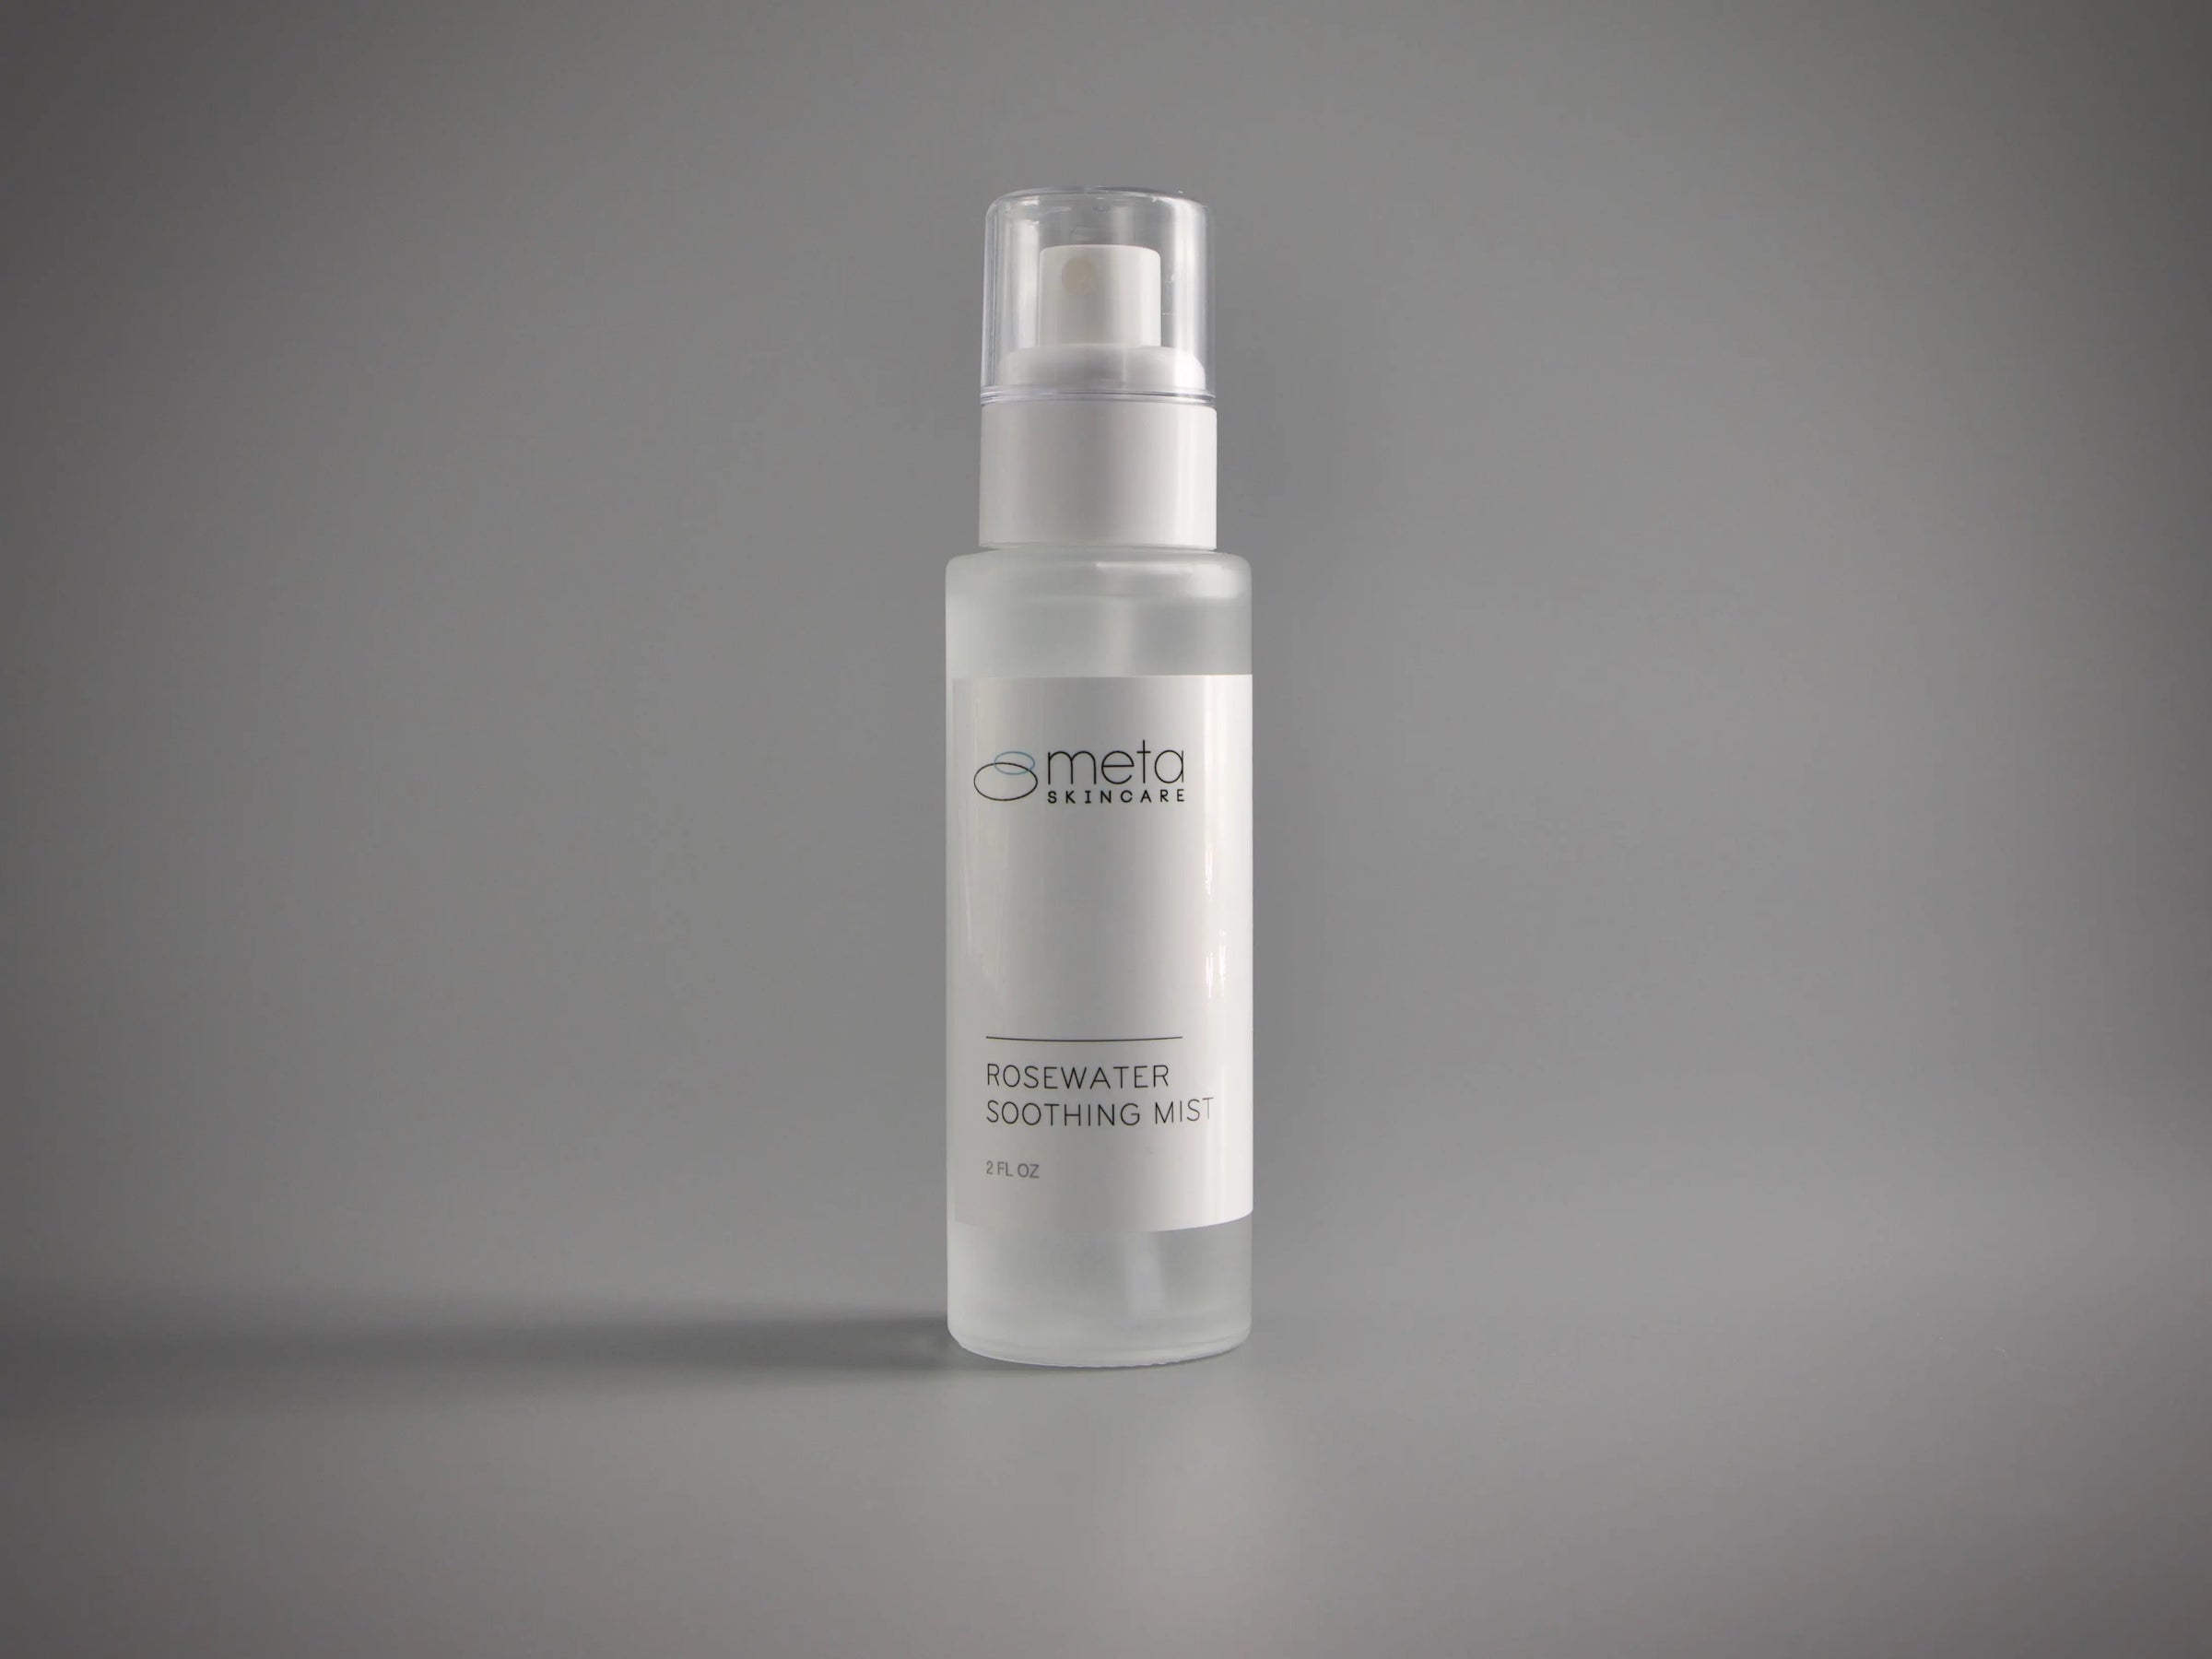 Rosewater Soothing Mist